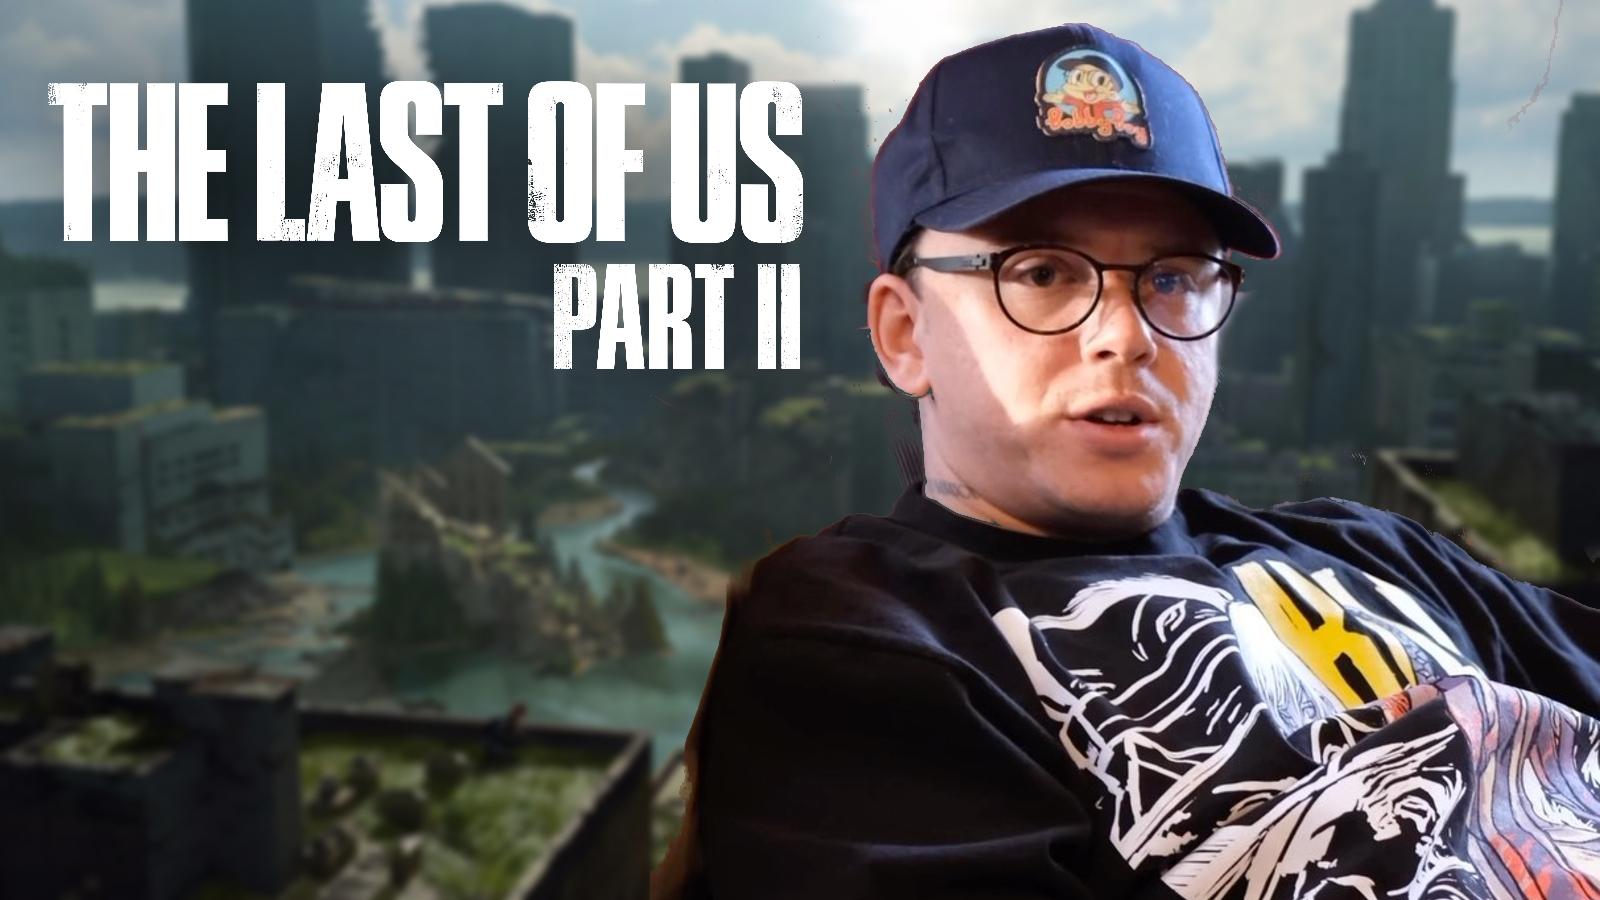 Logic with The Last of Us 2 background